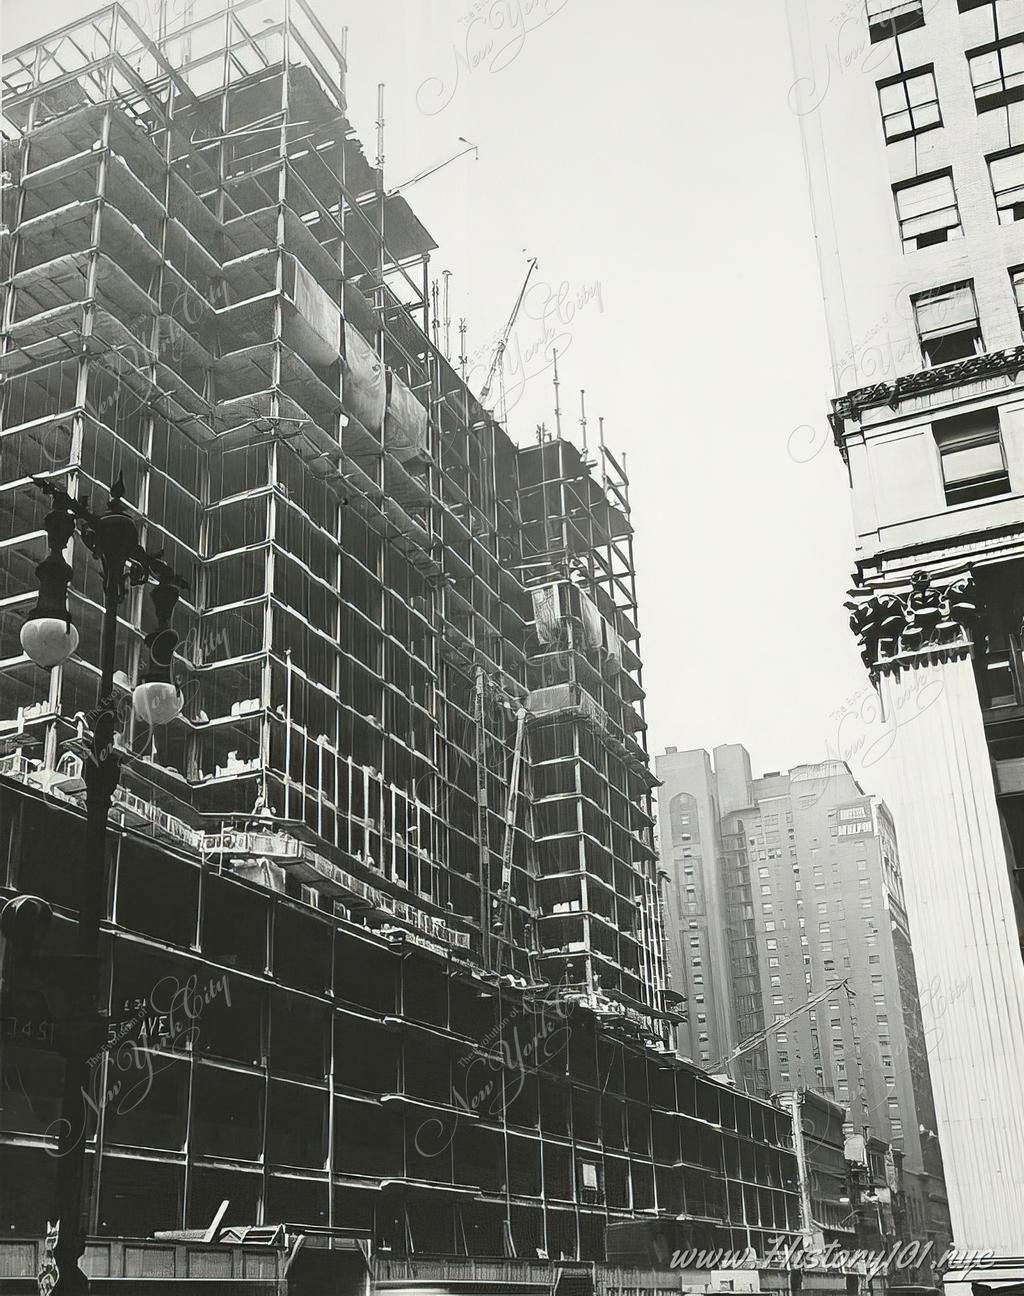 The first twenty floors of the Empire State Building are being constructed. There is no visible facade yet, only the steel beam structure and scaffolding of construction workers.